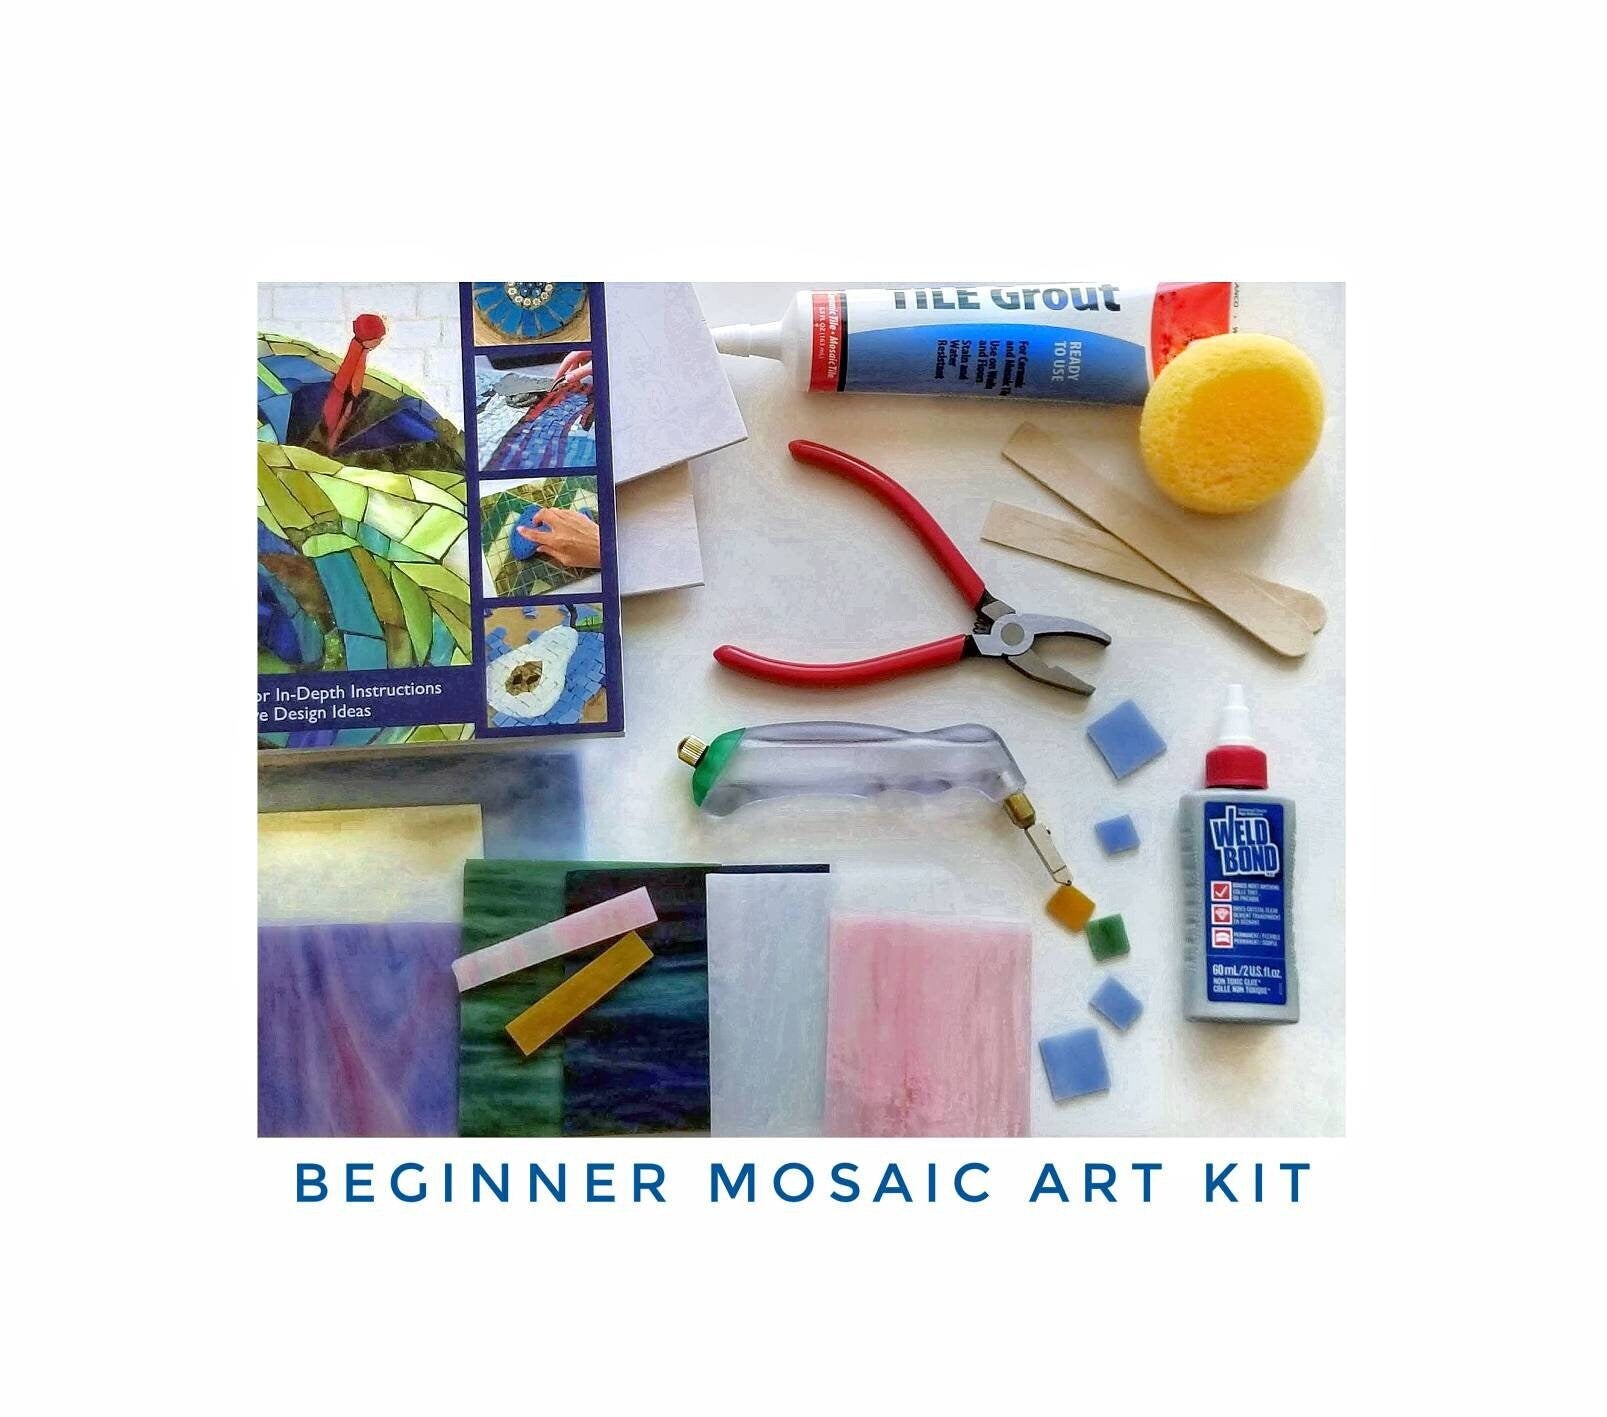 Stained Glass Beginner Tool Kit with Hakko Soldering Iron, Palm Grip  Cutter, Colorful Glass Sheets, Instruction Book, Supplies. 1-3 day ship